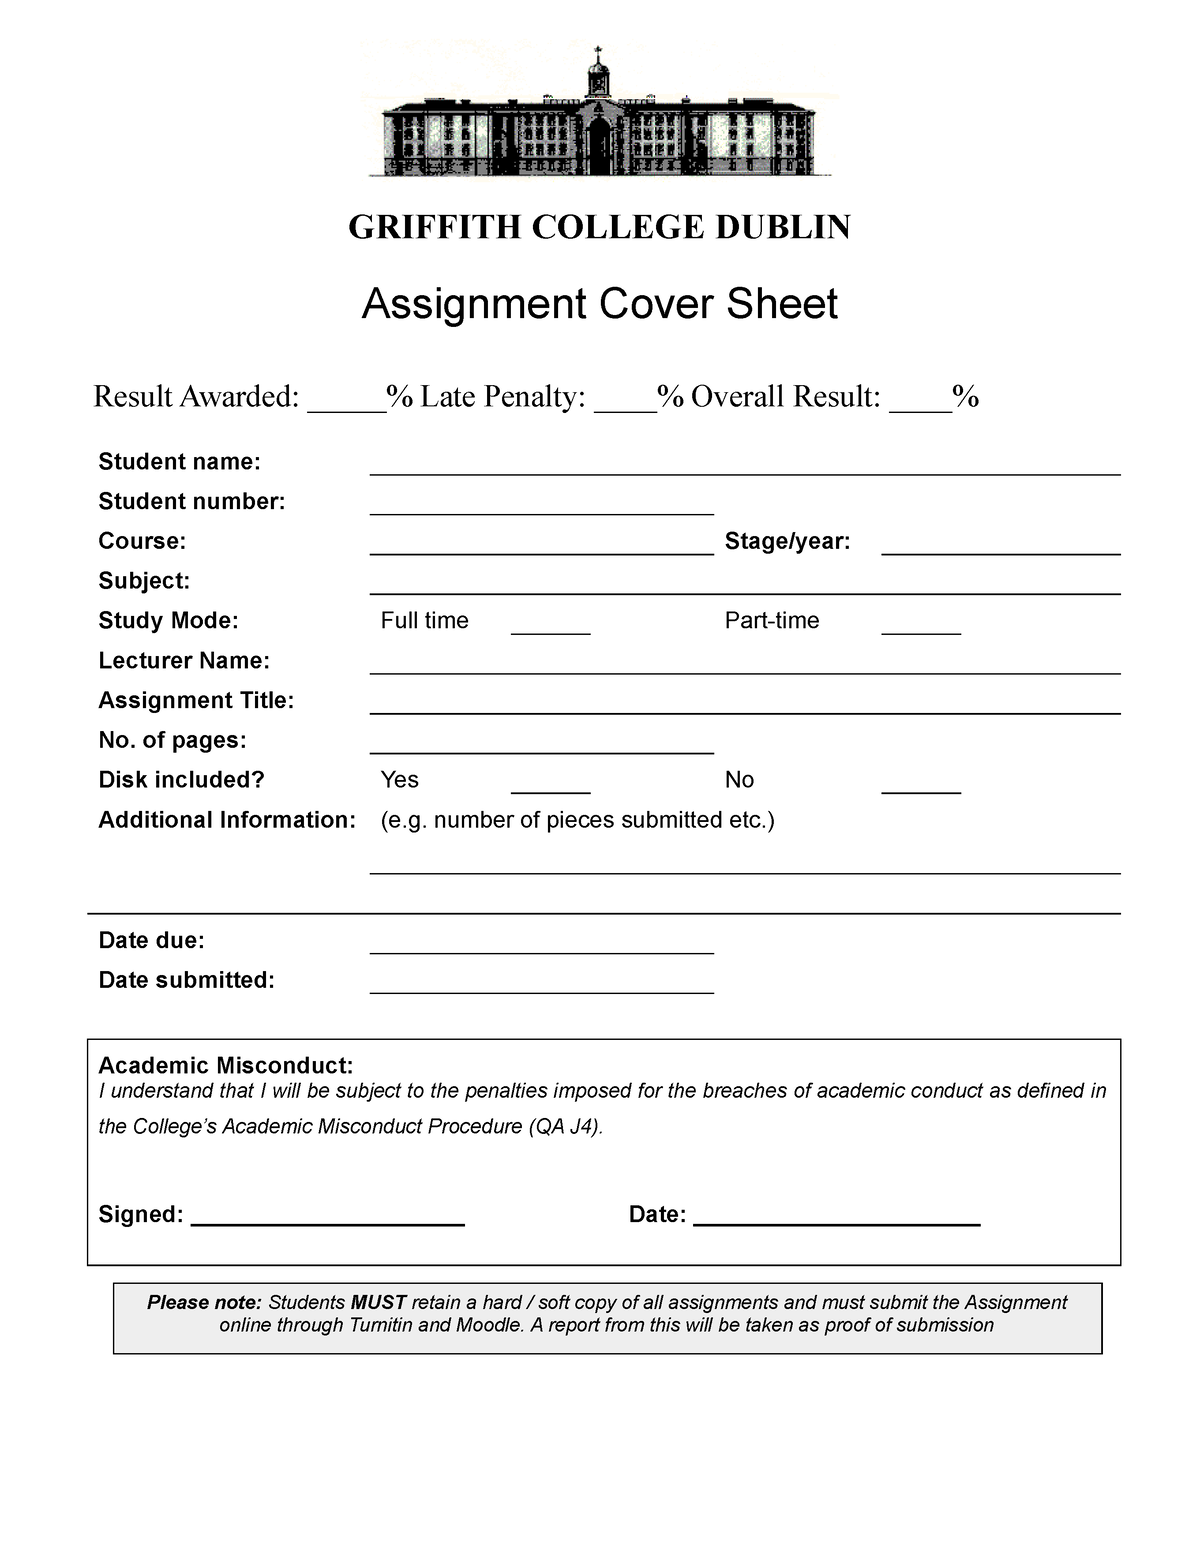 griffith university assignment format